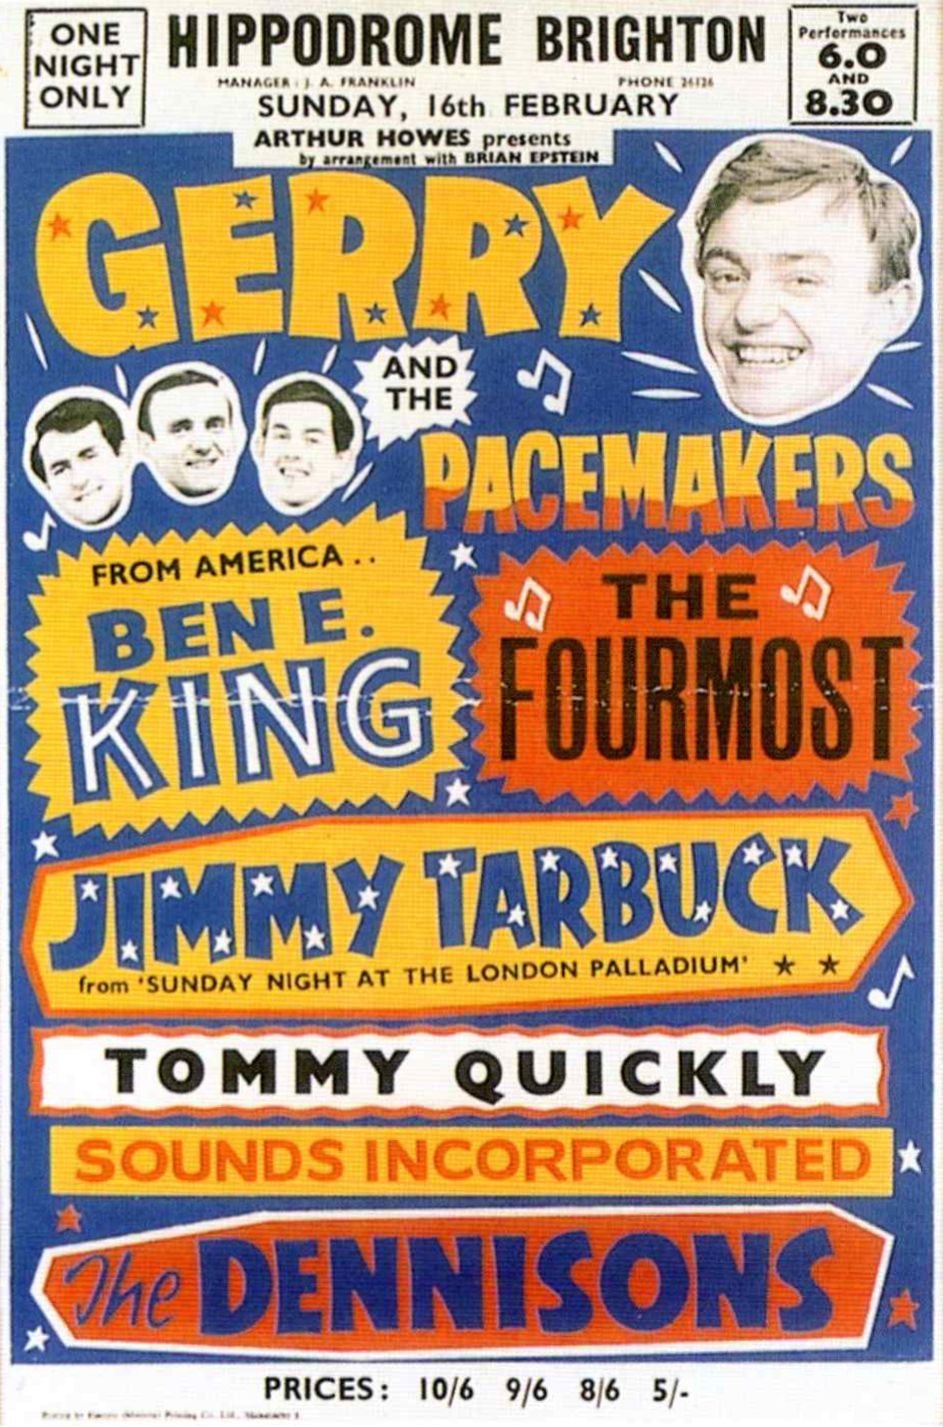 AOR-1.109-OP-1 Gerry & the Pacemakers Hippodrome 1964 Concert Poster